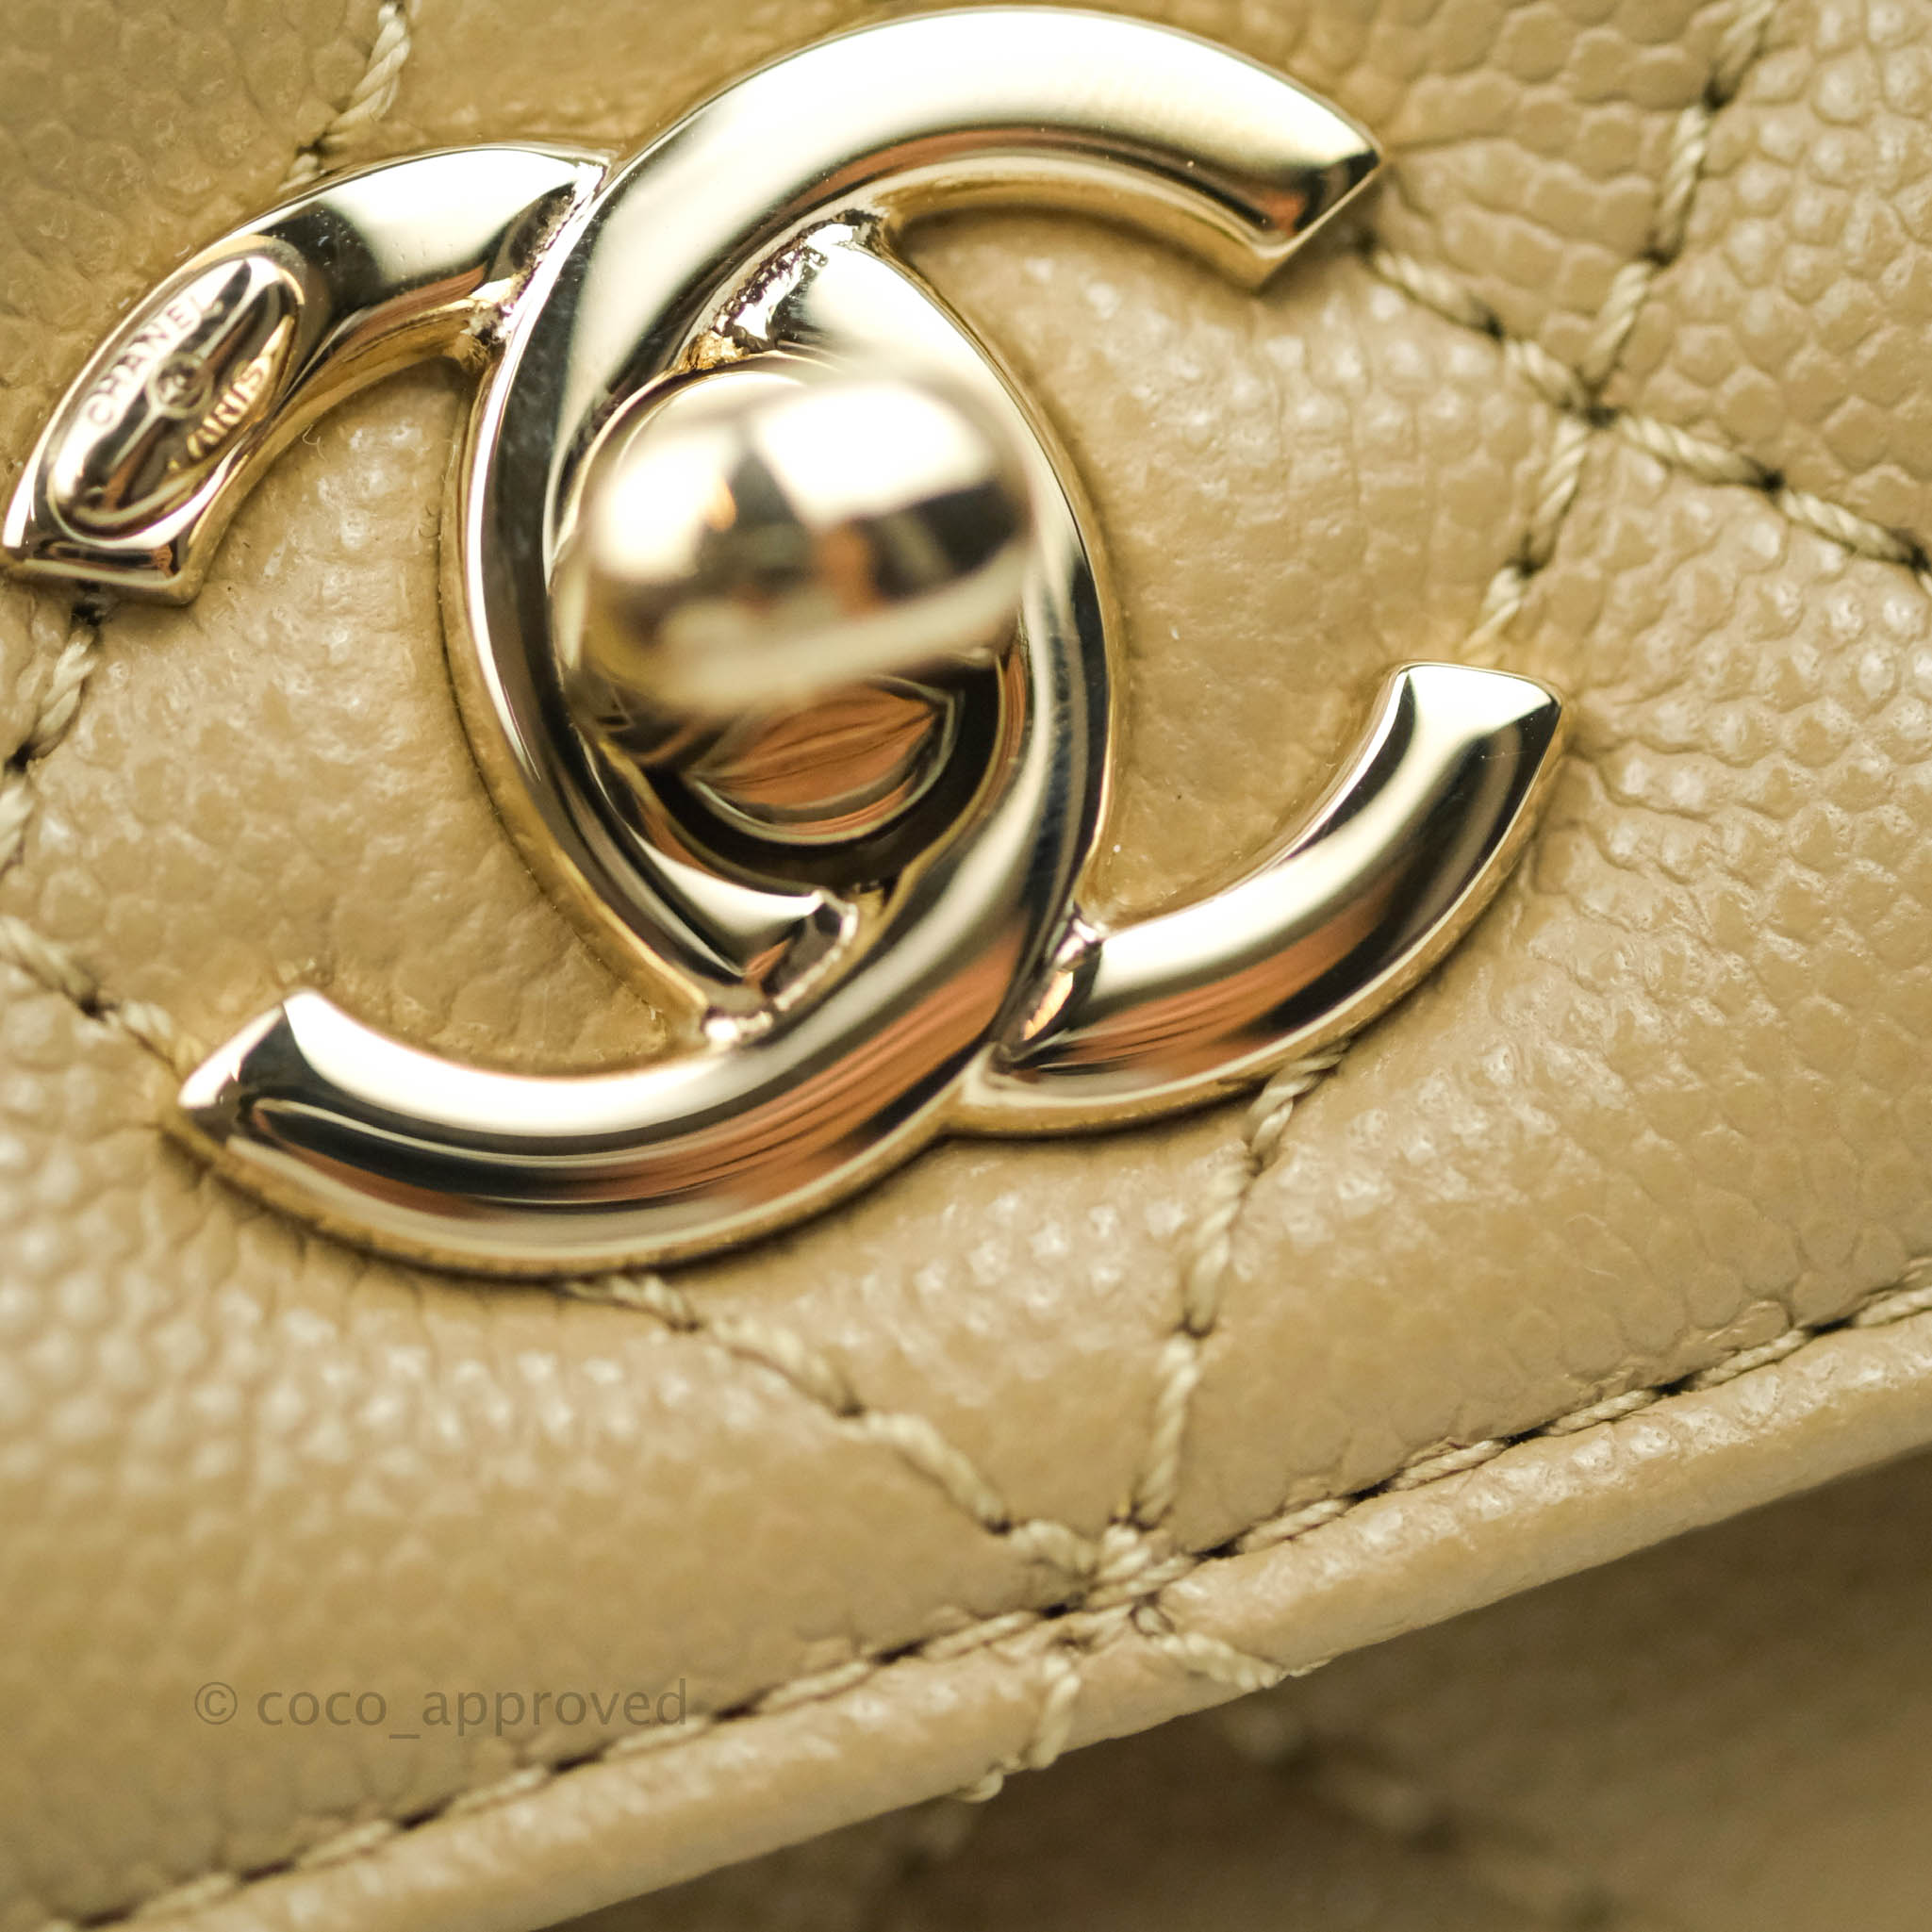 CHANEL Caviar Lizard Quilted Small Coco Handle Flap White Beige 485299